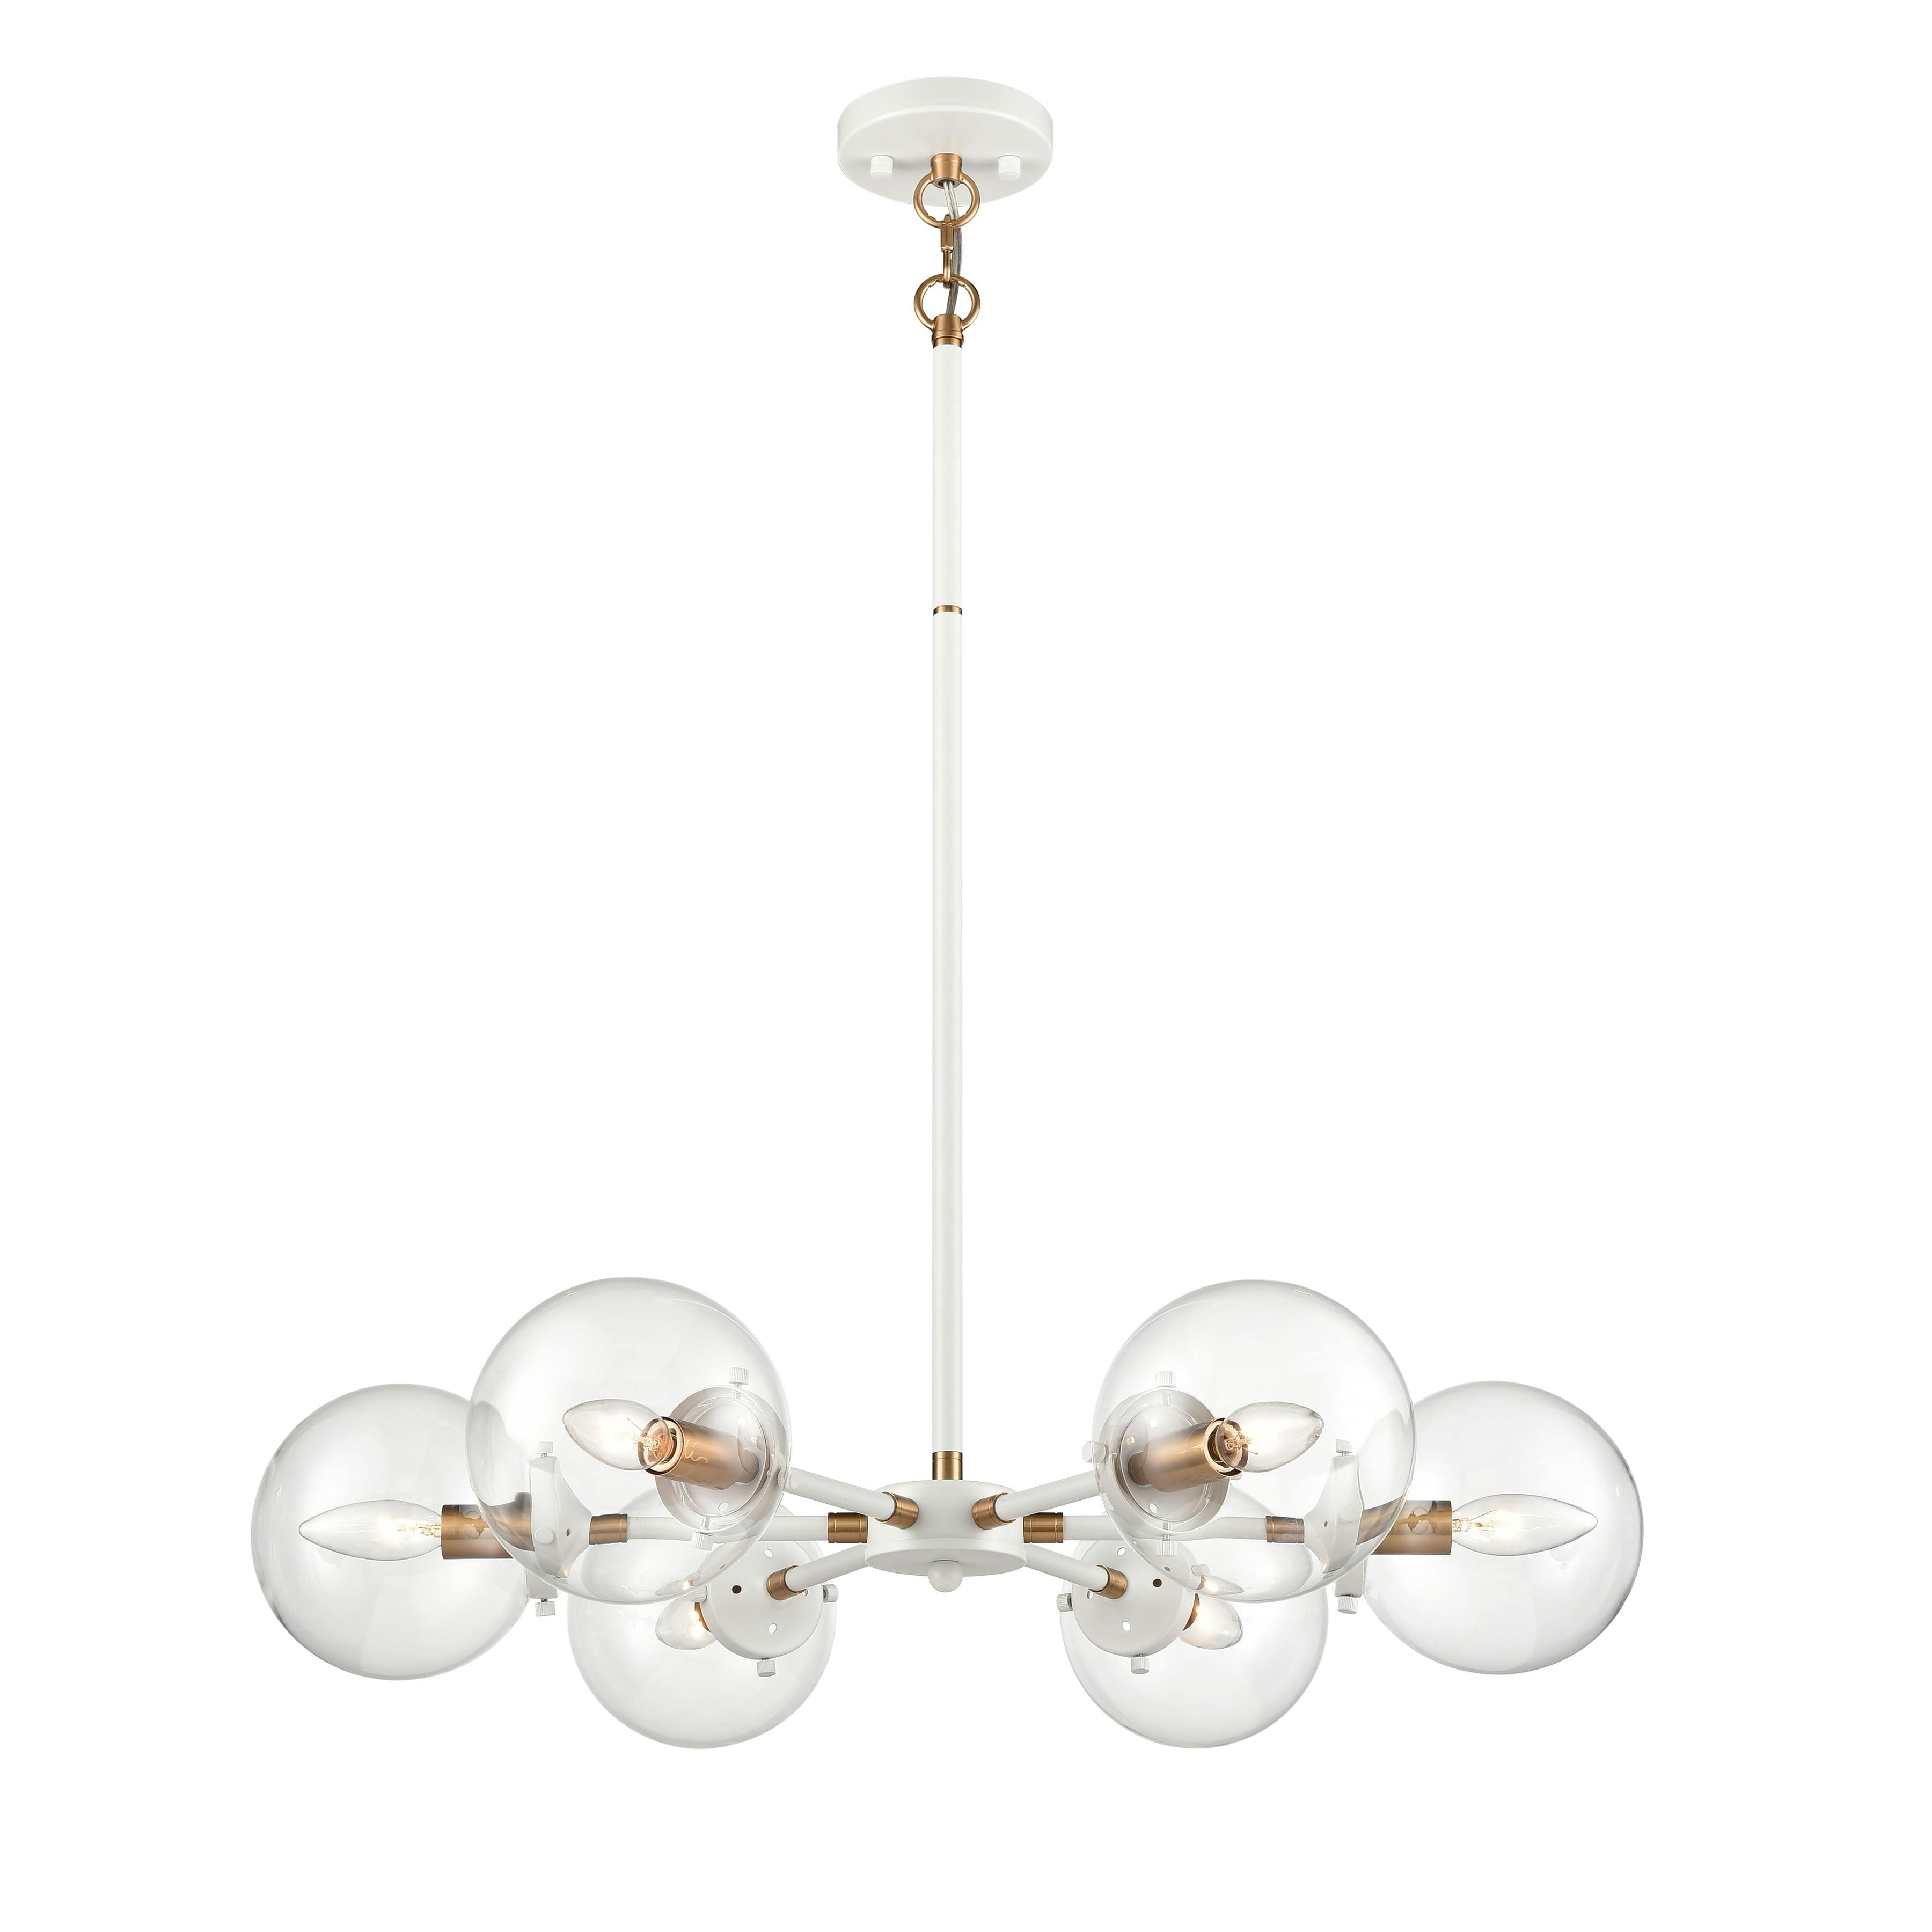 Matte White and Satin Brass 6-Light Midcentury Modern Chandelier with Clear Glass